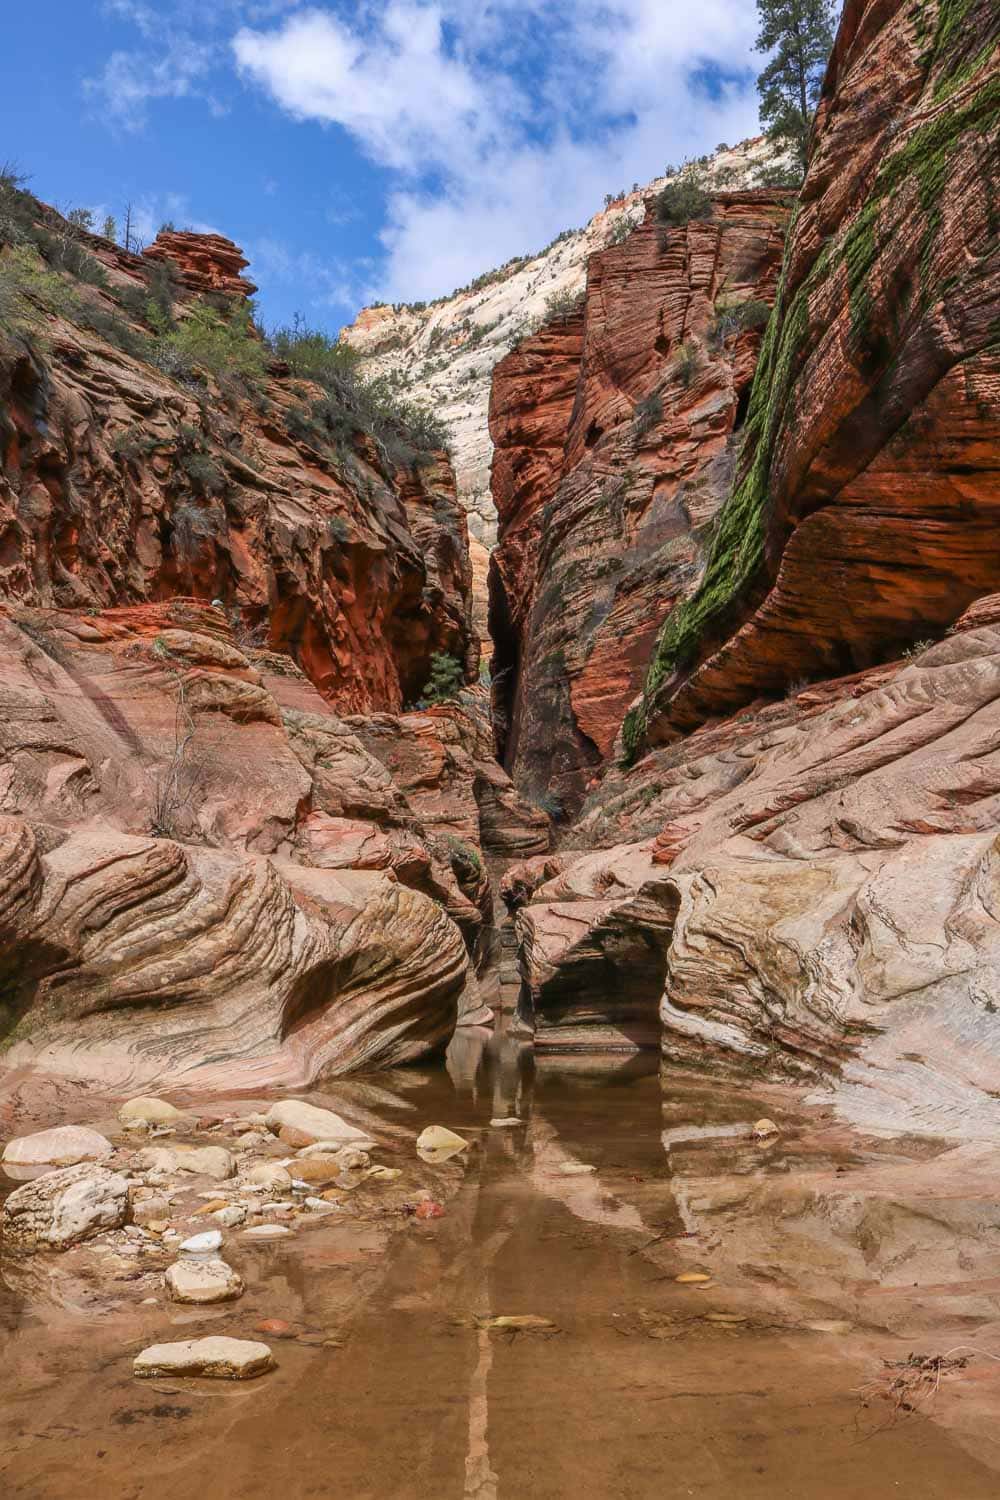 Echo Canyon, one of the most scenic views in Zion National Park